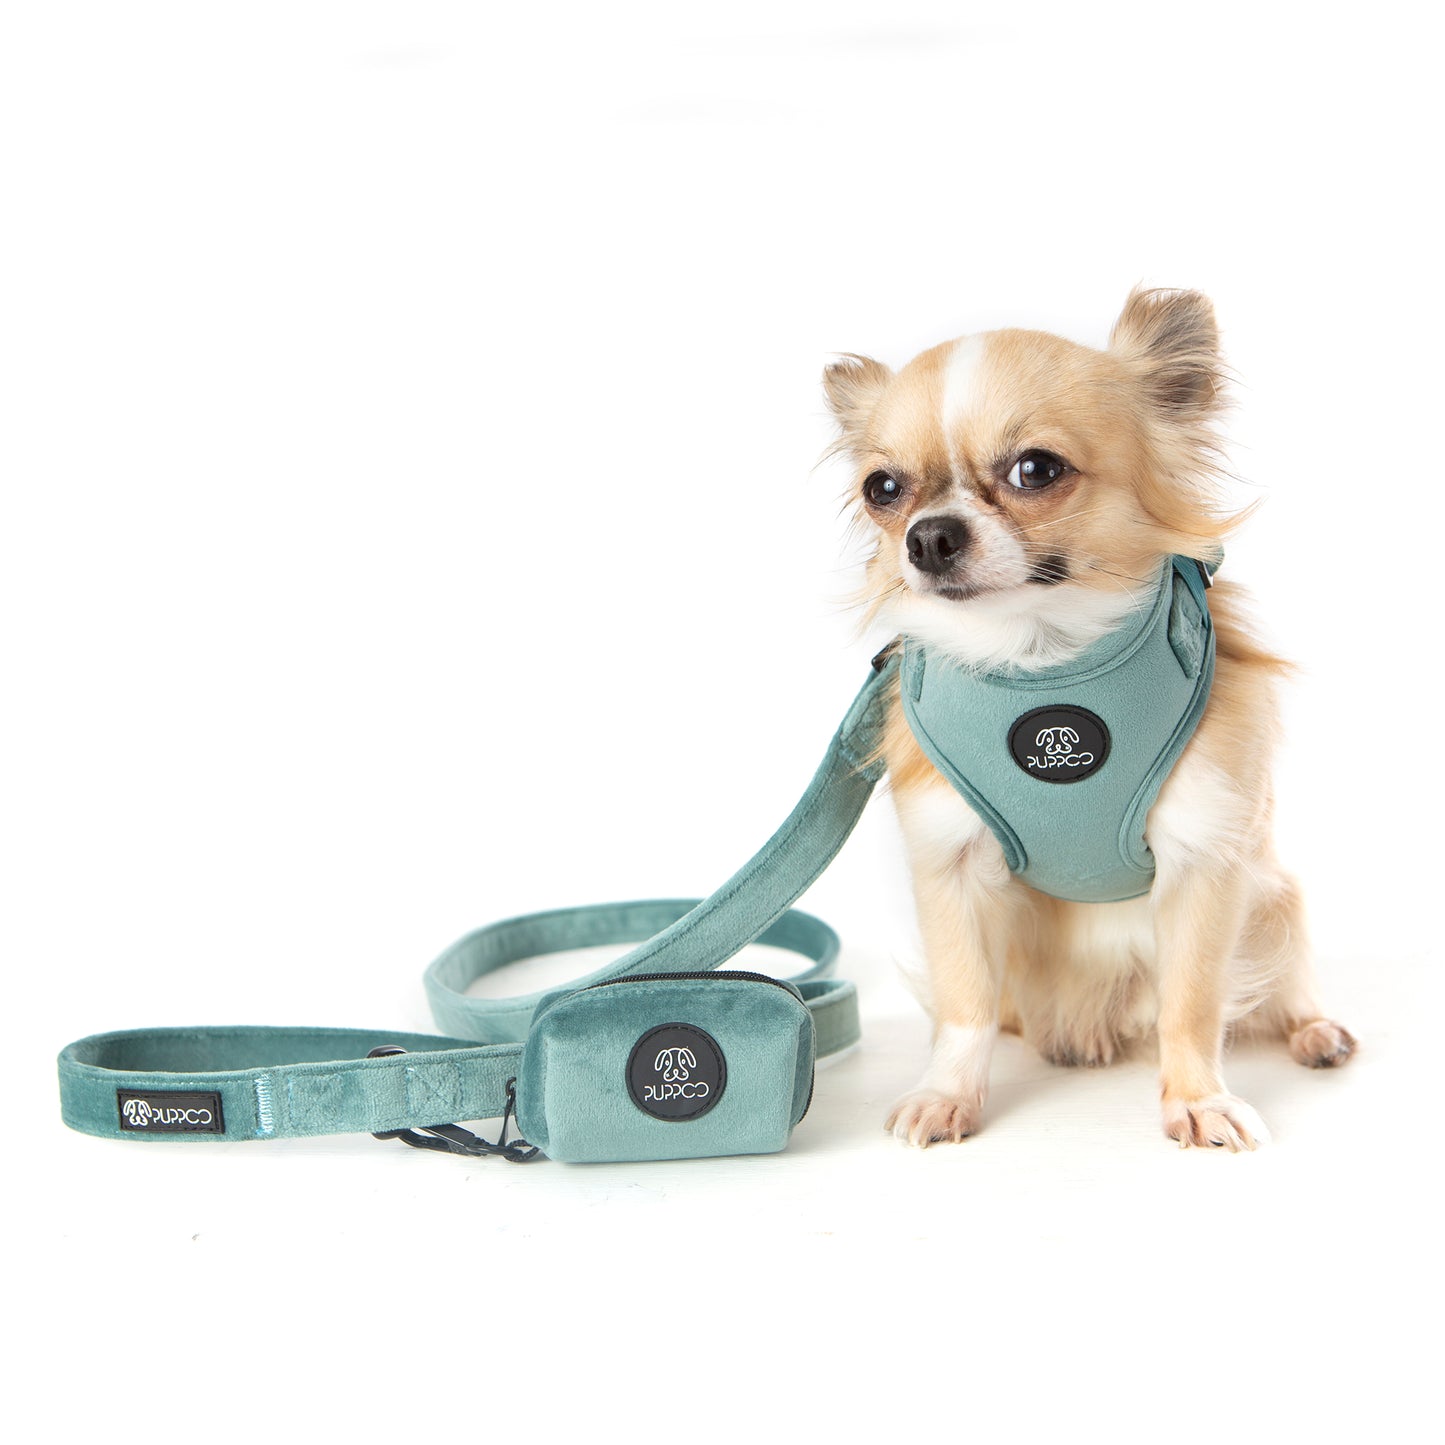 Teal velvet dog harness on a Chihuahua